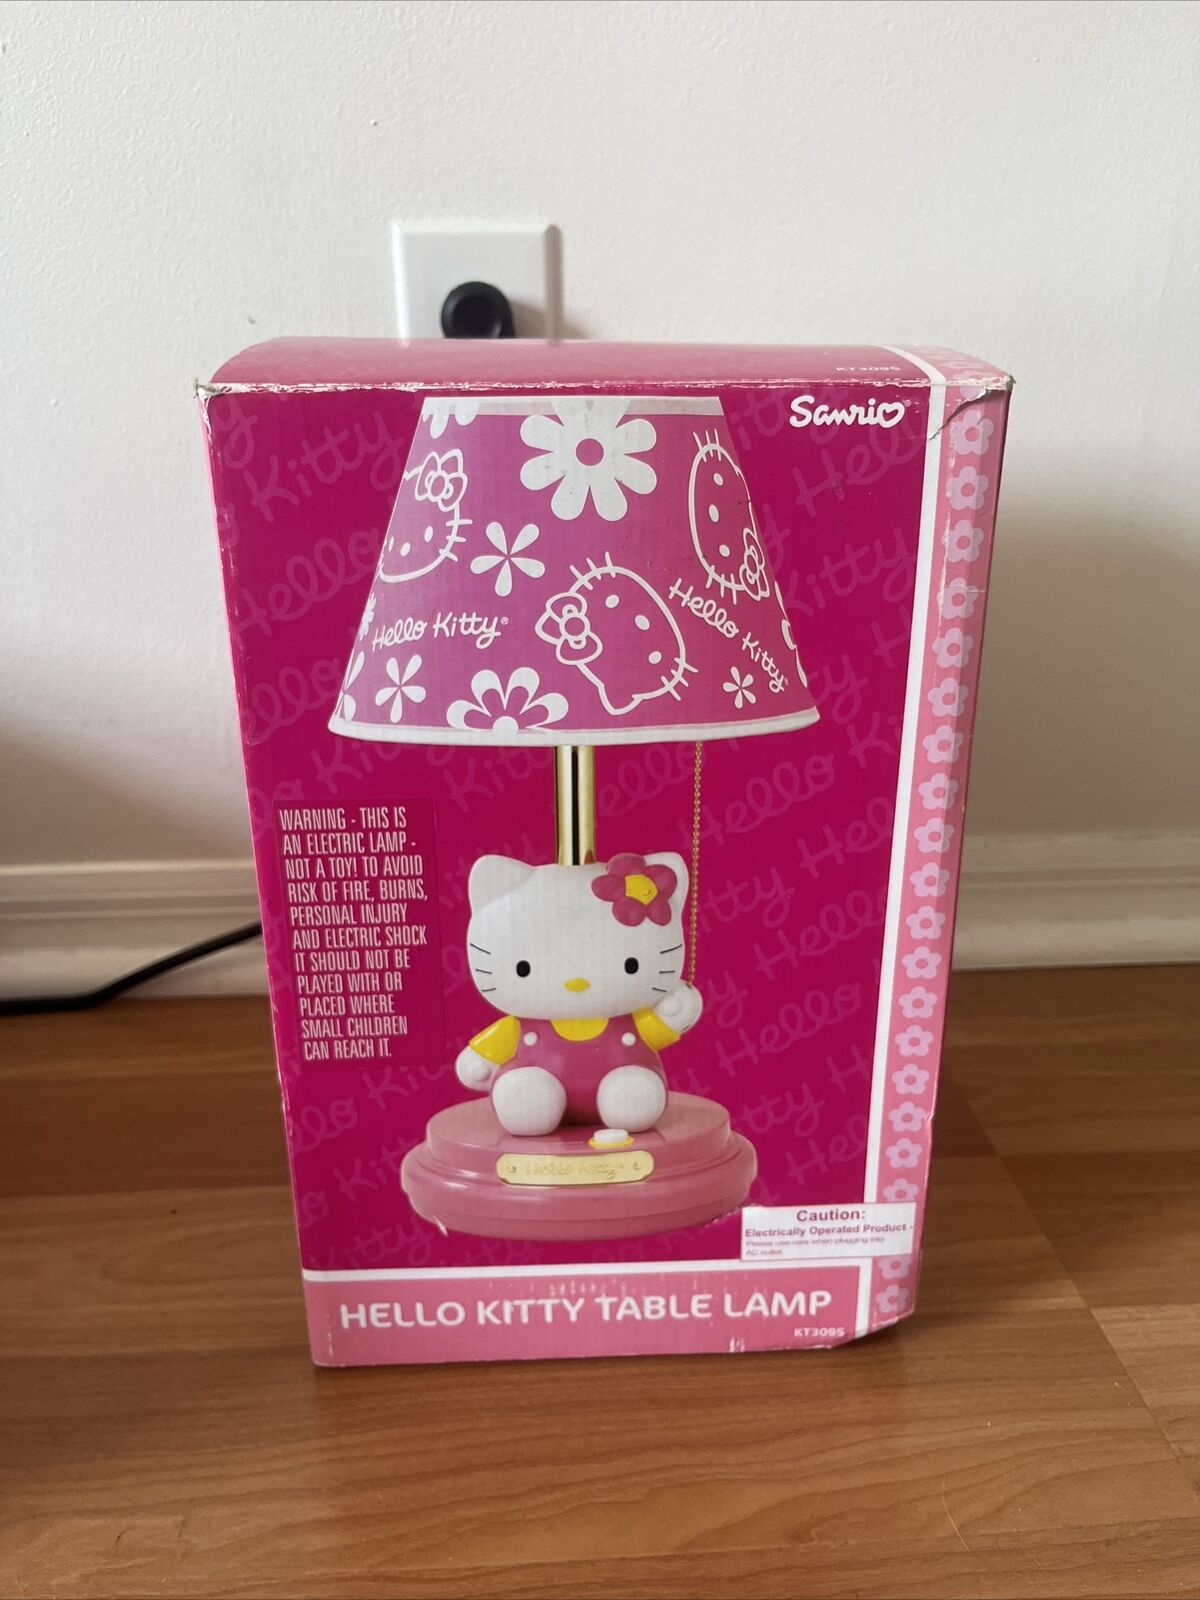 2007 Sanrio HELLO KITTY Table Lamp with Original Pink Shade KT3095 NEW IN BOX